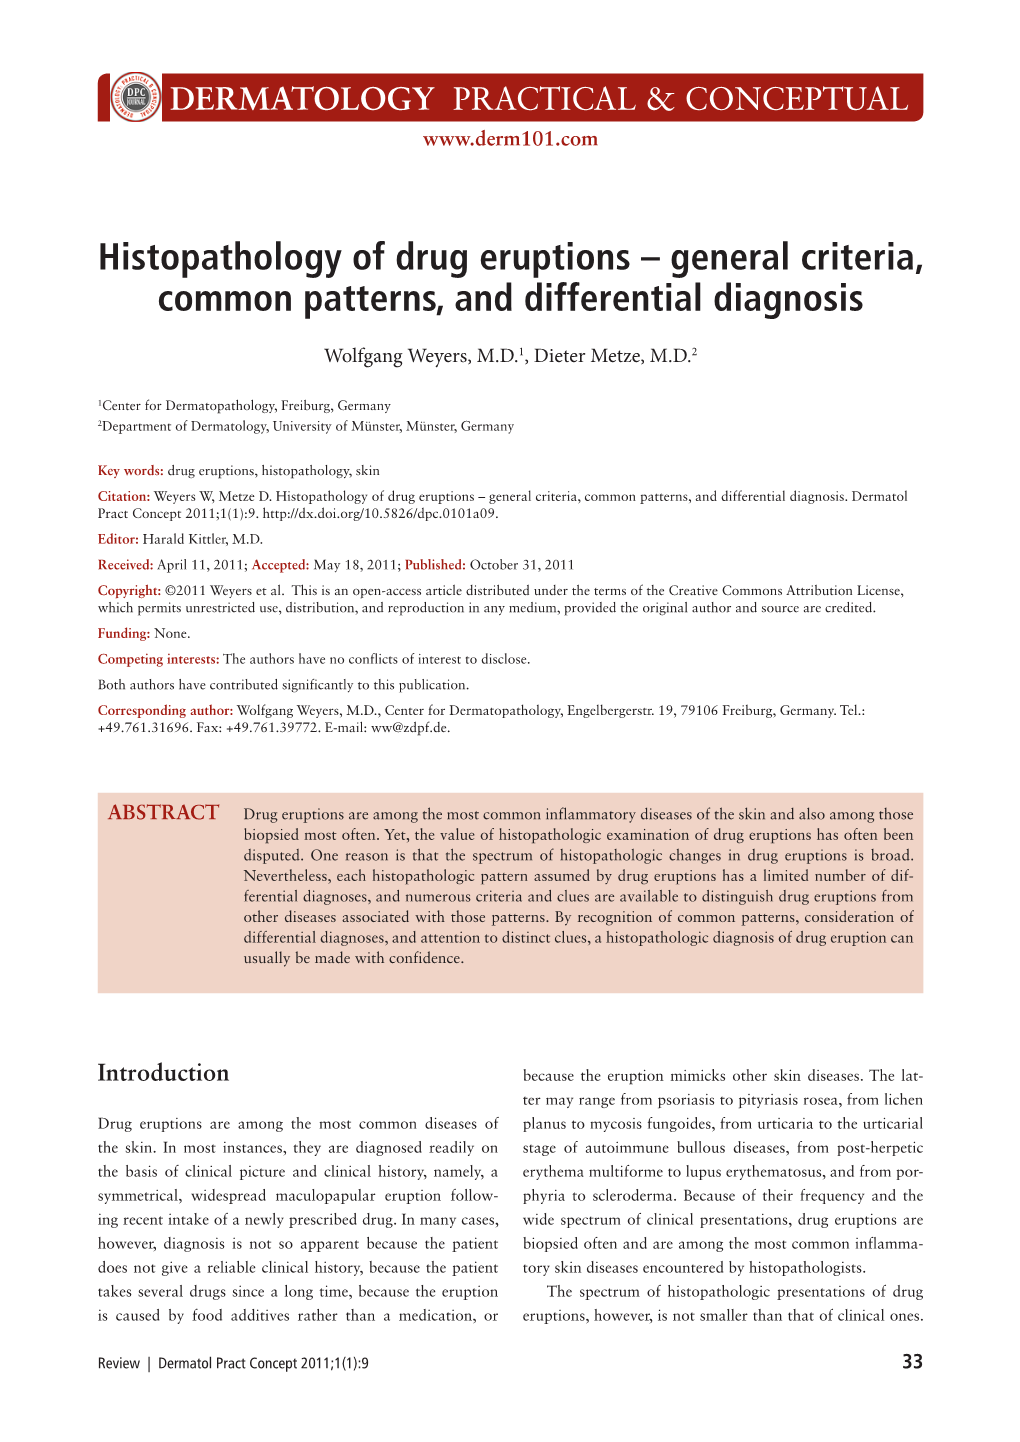 Histopathology of Drug Eruptions – General Criteria, Common Patterns, and Differential Diagnosis